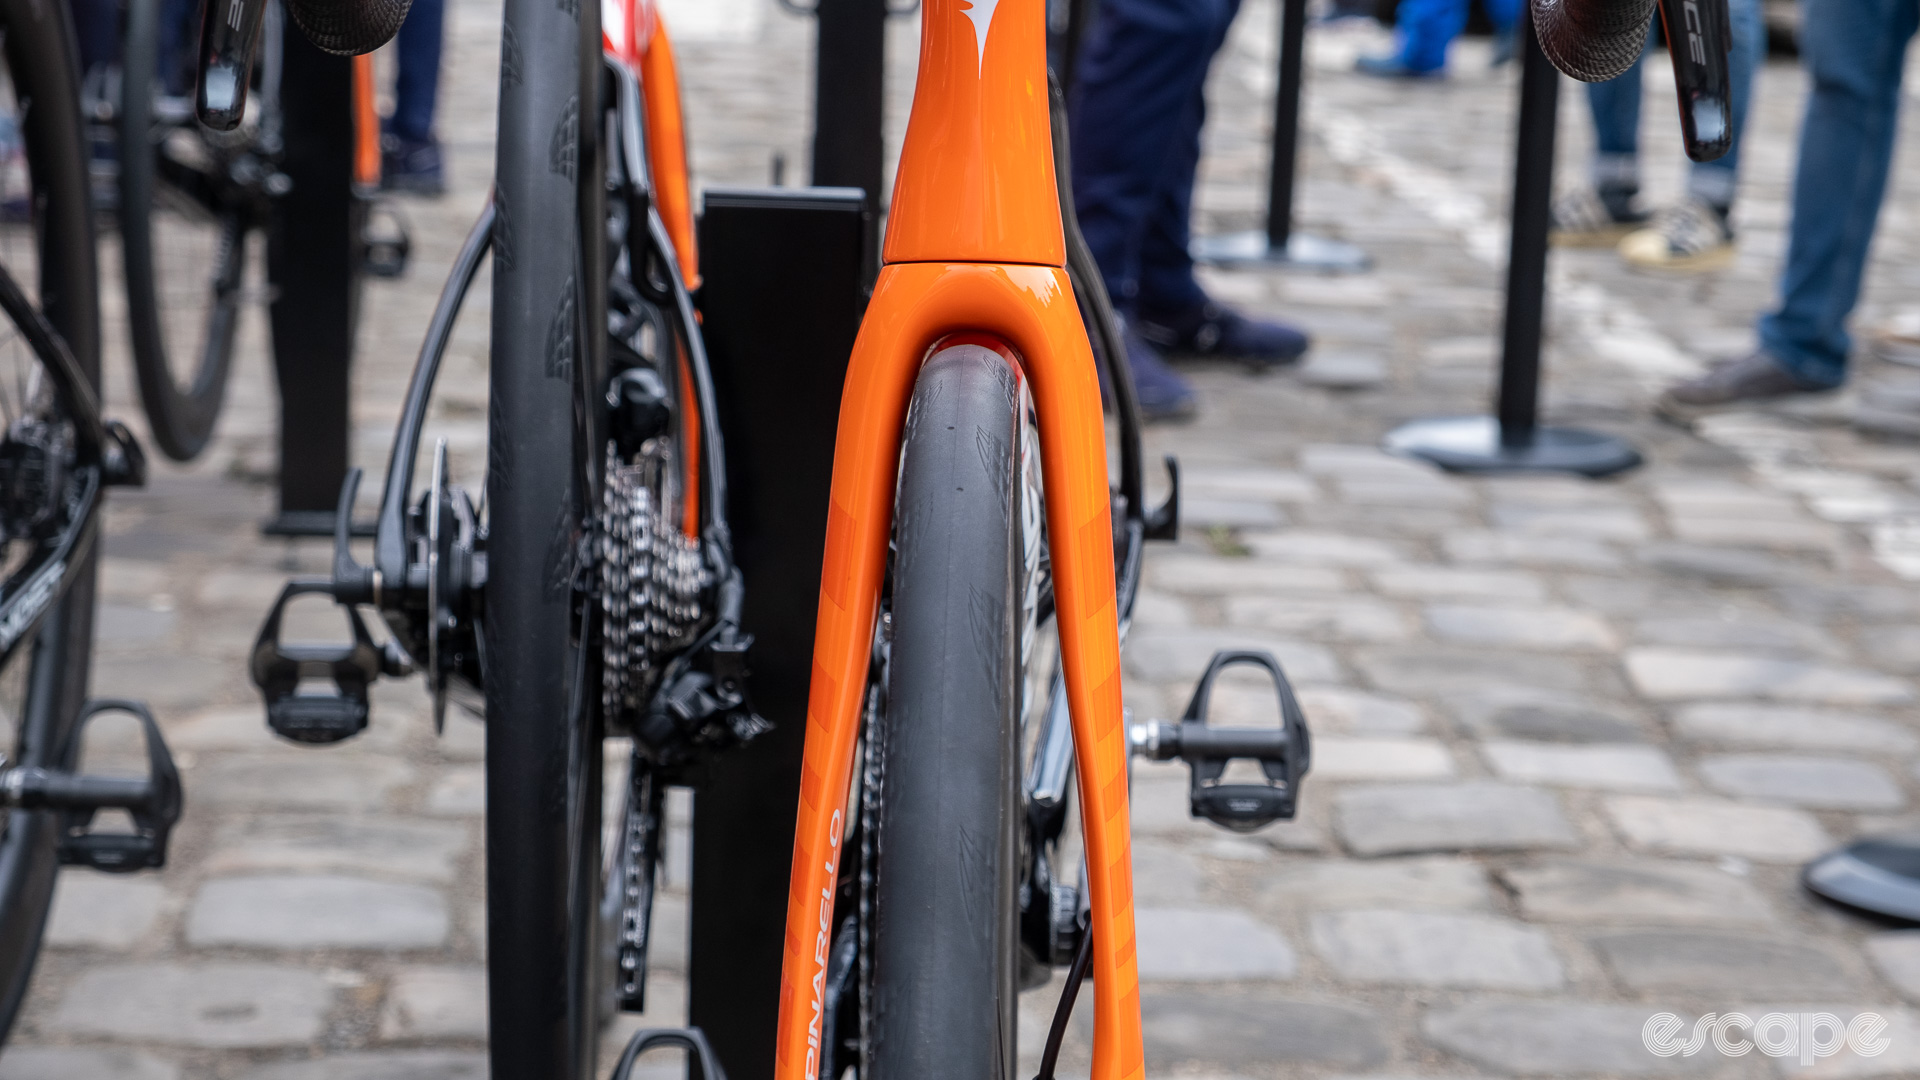 The image shows the tyre clearance on a Pinarello bike.